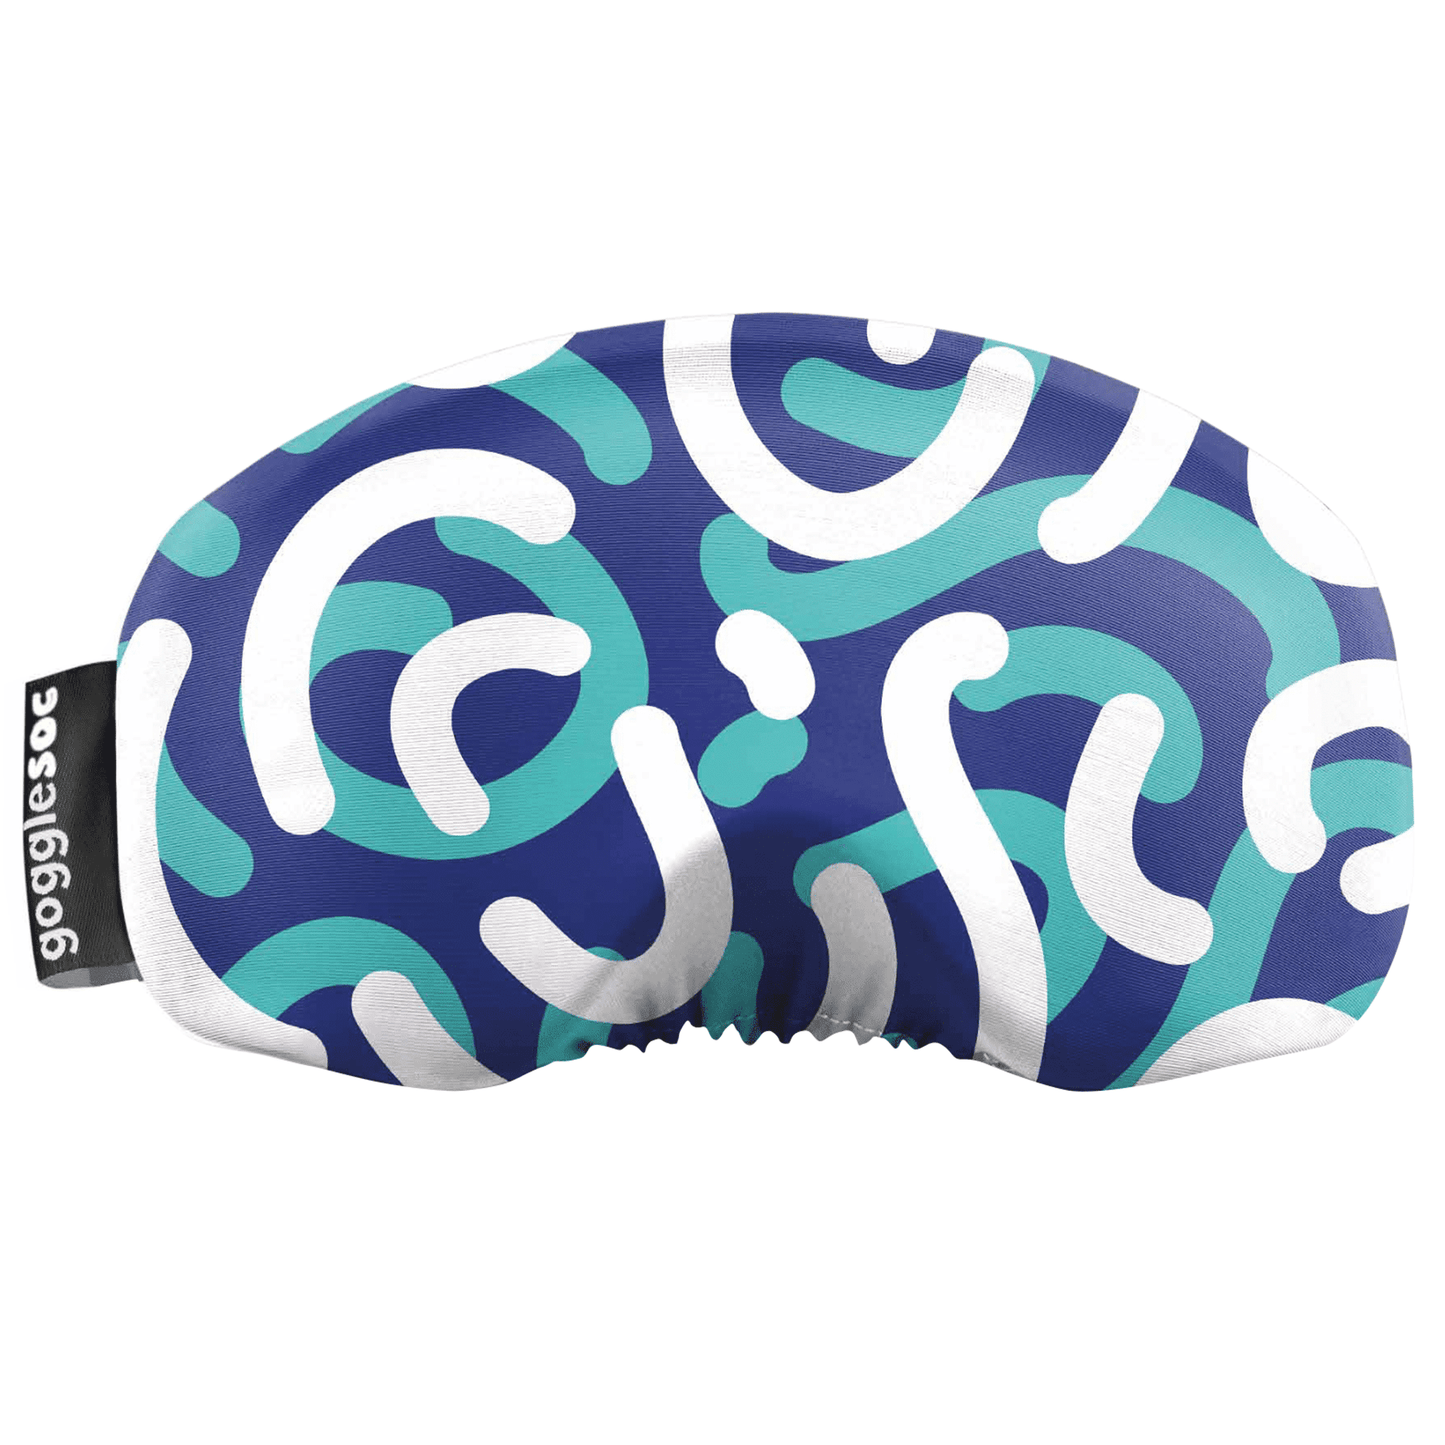 Gogglesoc - Bright Blue Curves Soc Funky Yeti Exclusive Goggle Cover